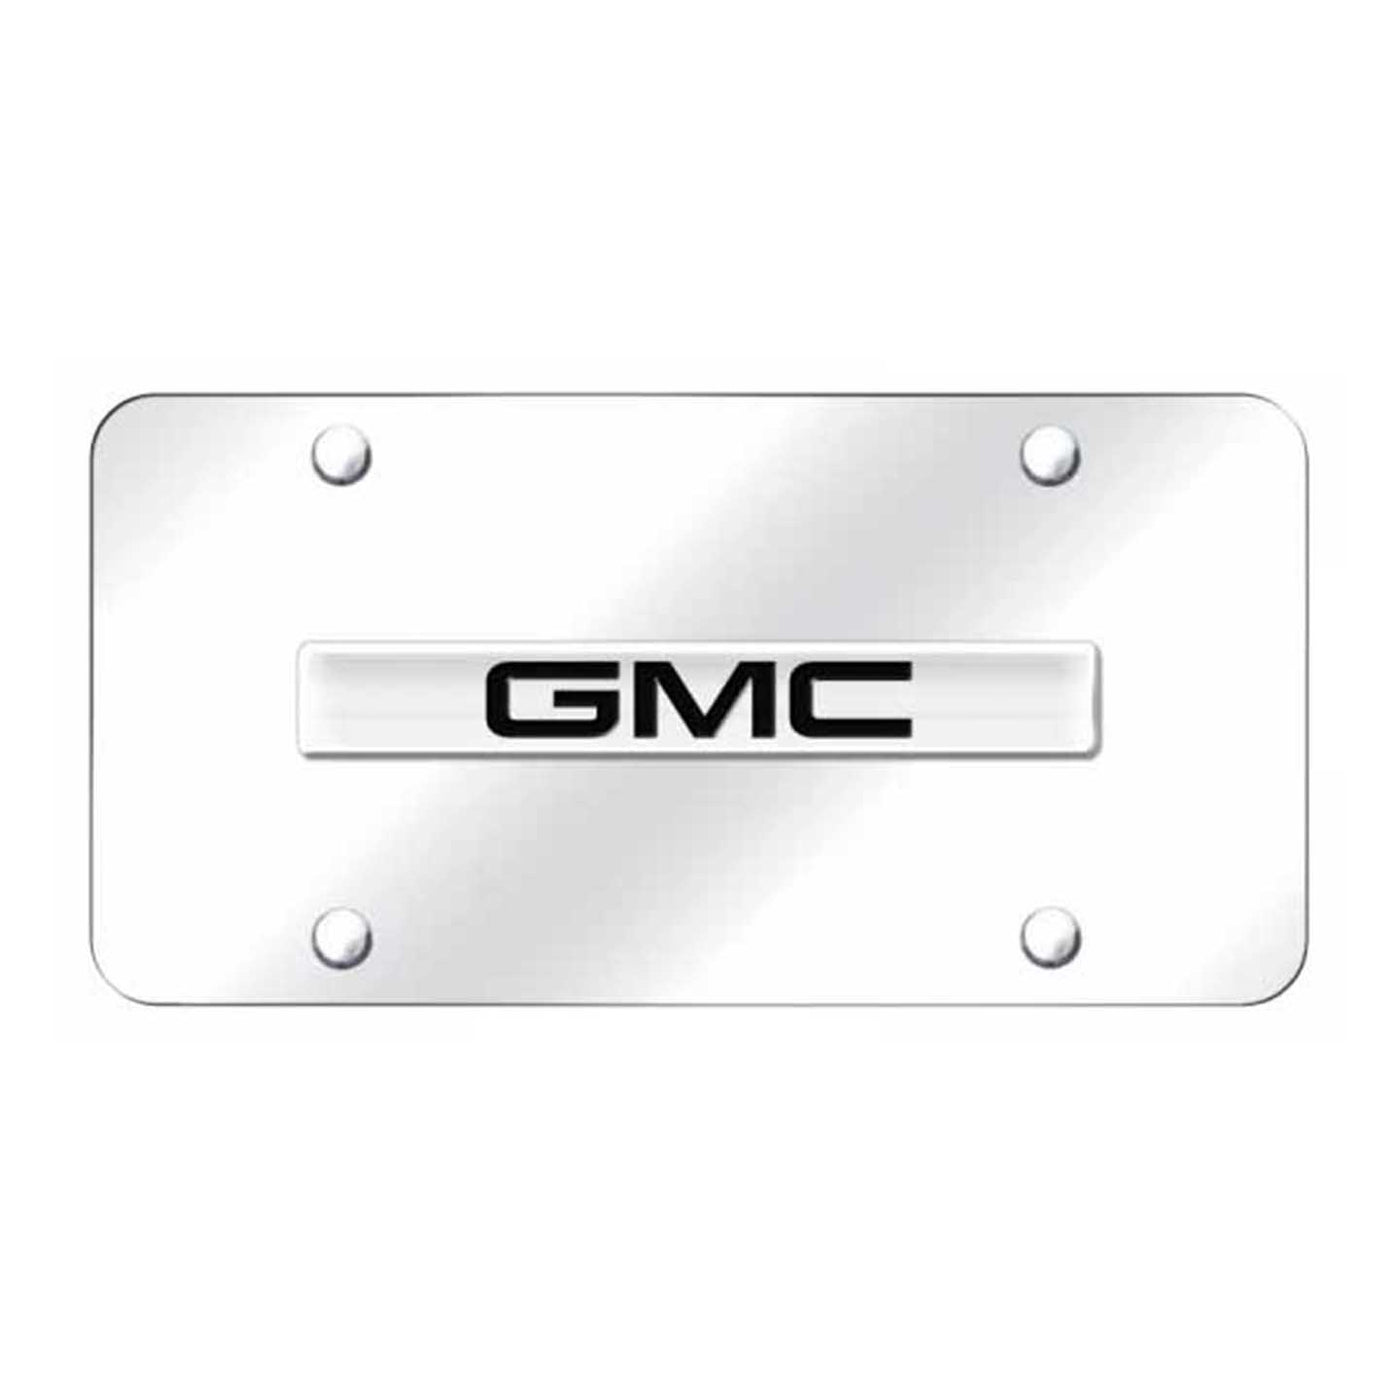 GMC Name License Plate - Chrome on Mirrored